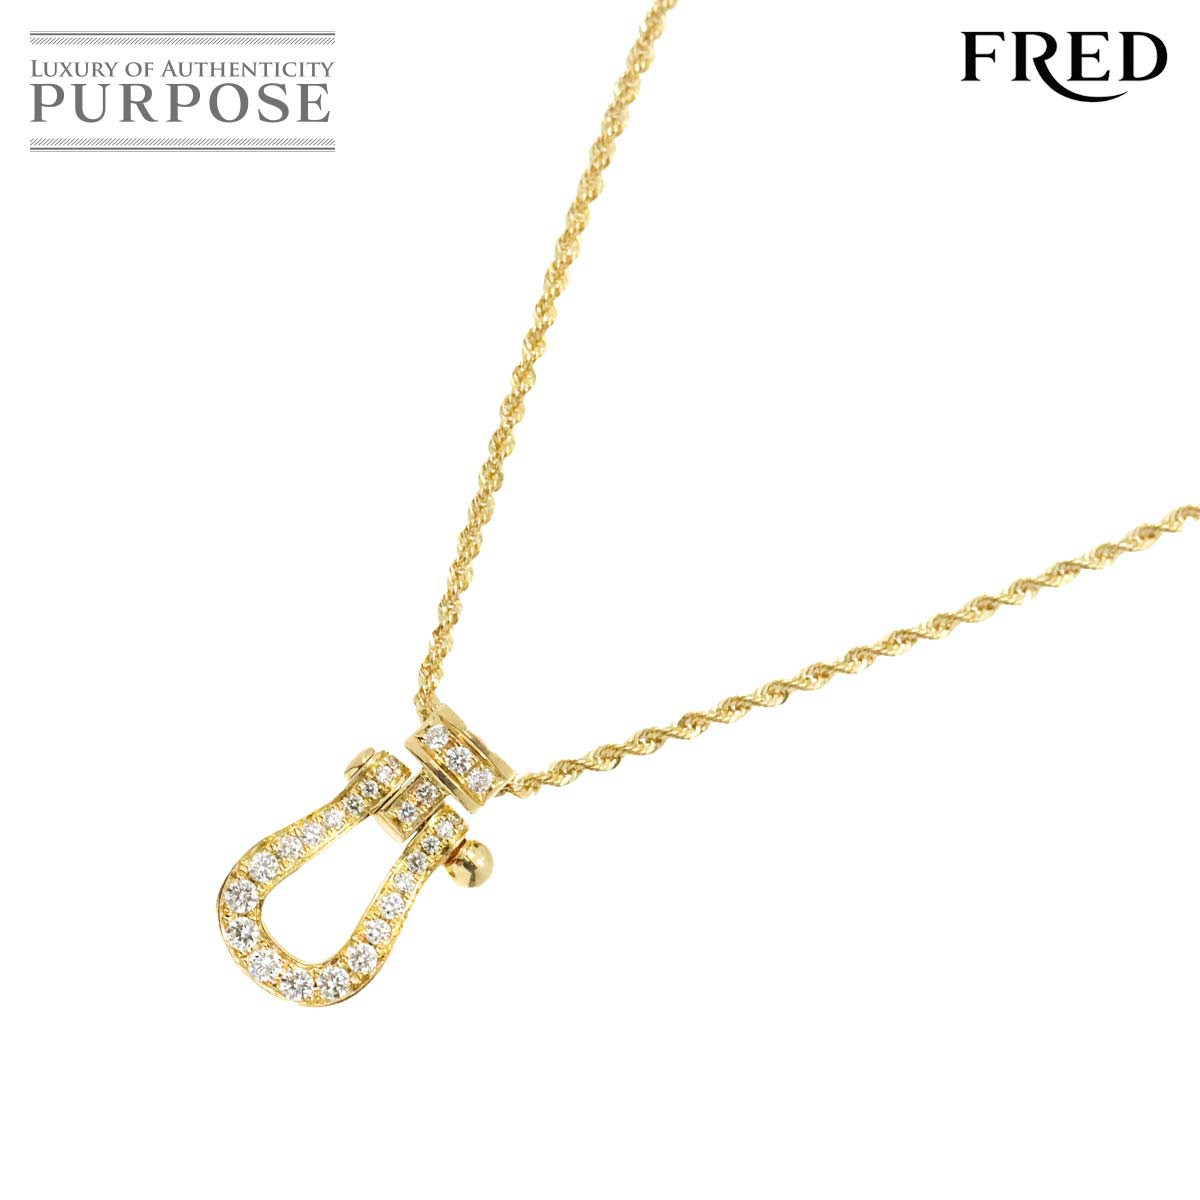 yVilz tbh FRED tH[X10 ~fBA lbNX 50cm _C K18 YG 750 CG[S[h Force10 Necklace